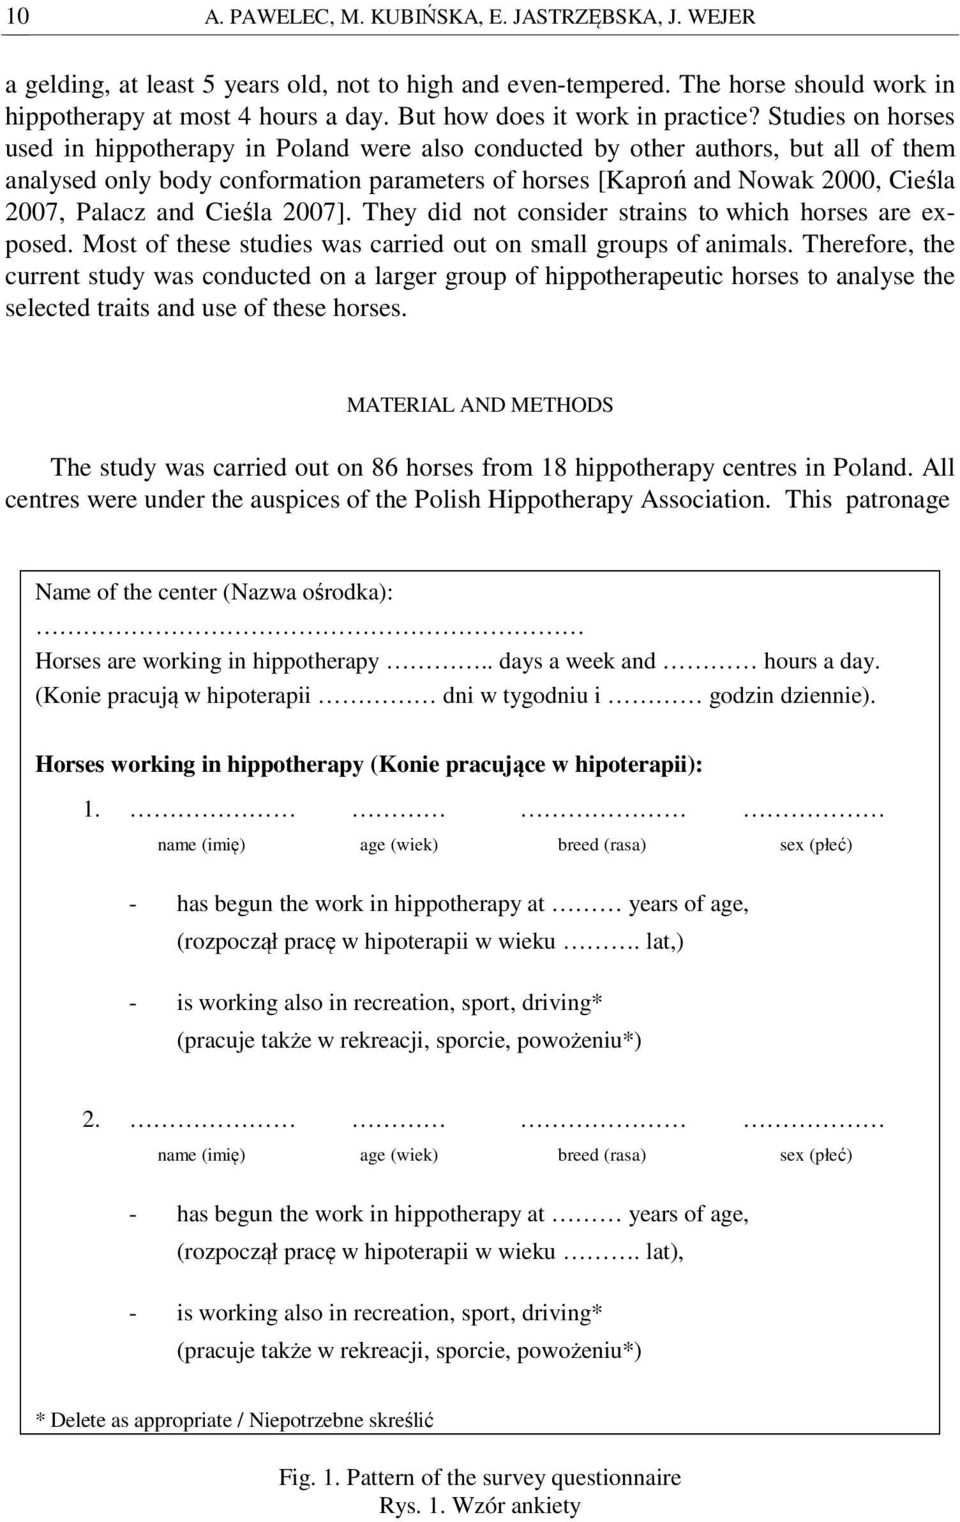 Studies on horses used in hippotherapy in Poland were also conducted by other authors, but all of them analysed only body conformation parameters of horses [Kaproń and Nowak 2, Cieśla 27, Palacz and